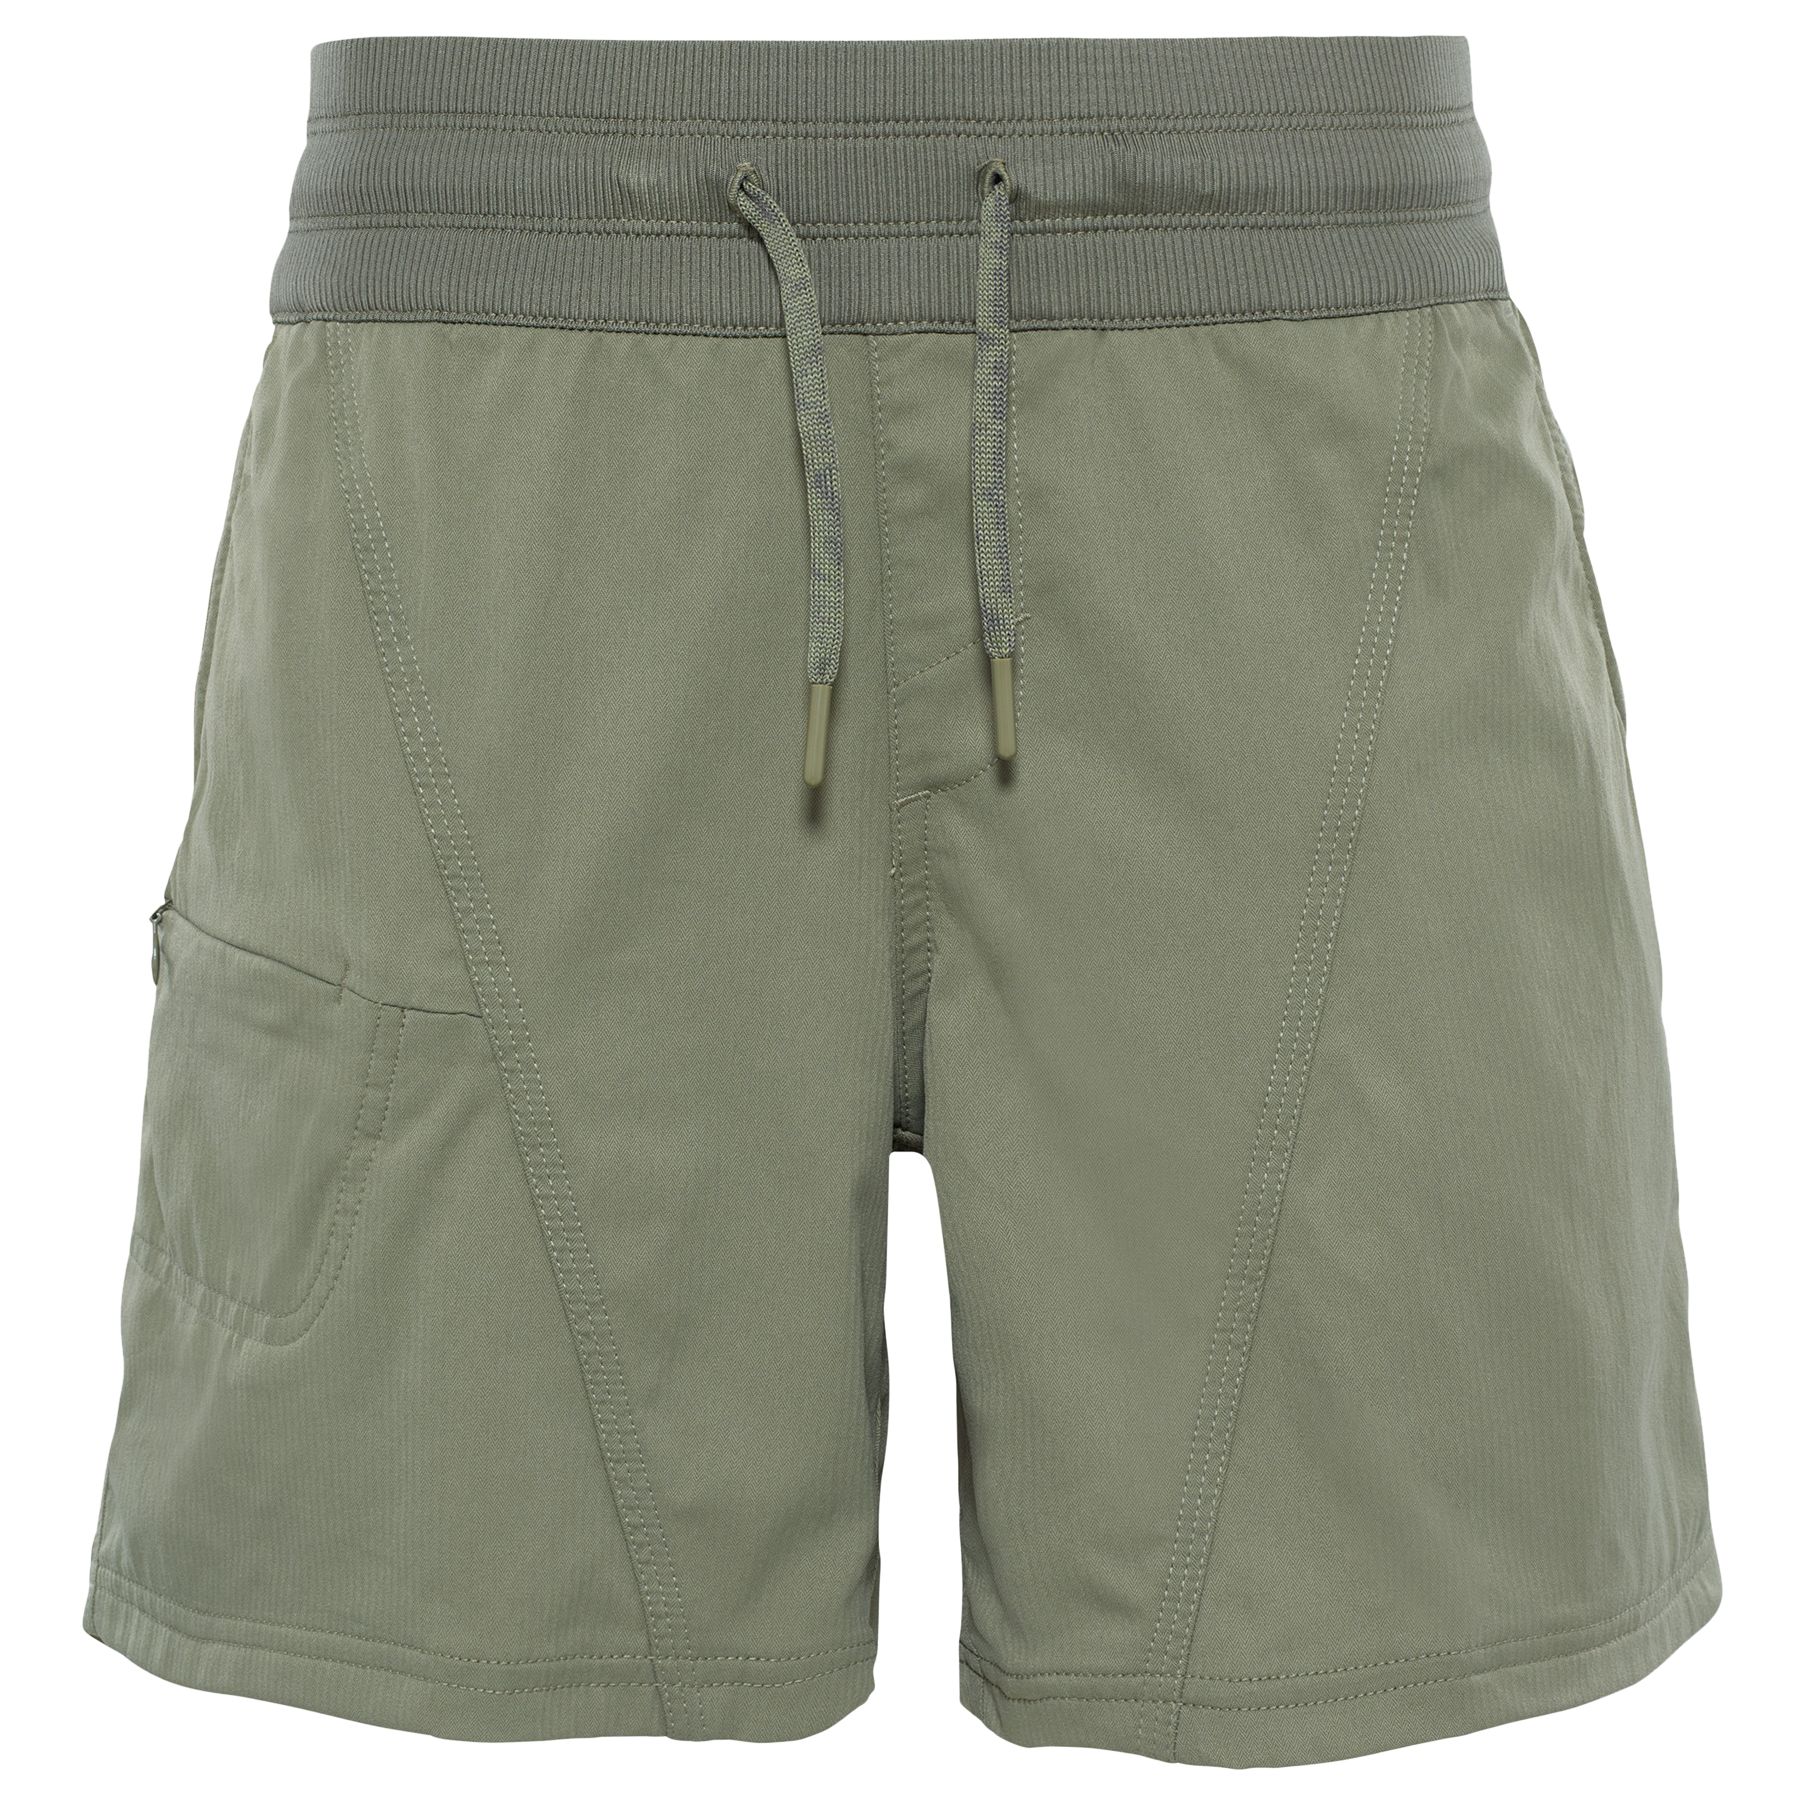 The North Face Reactor Aphrodite Shorts, Green, S